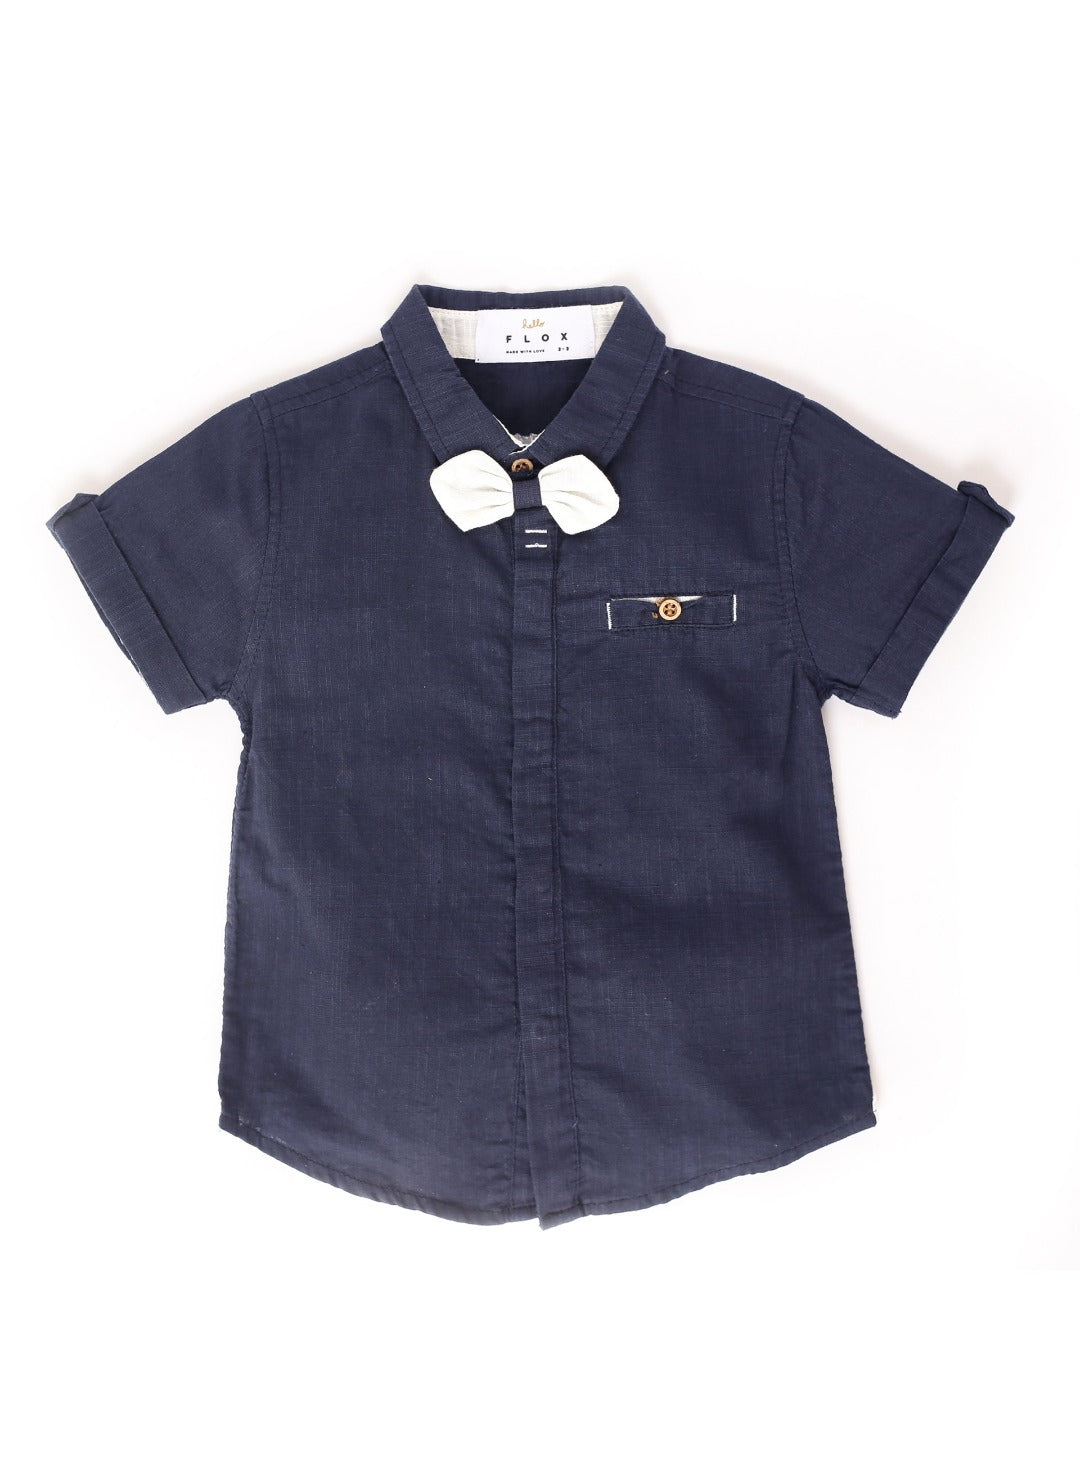 navy blue collared shirt with white bow tie